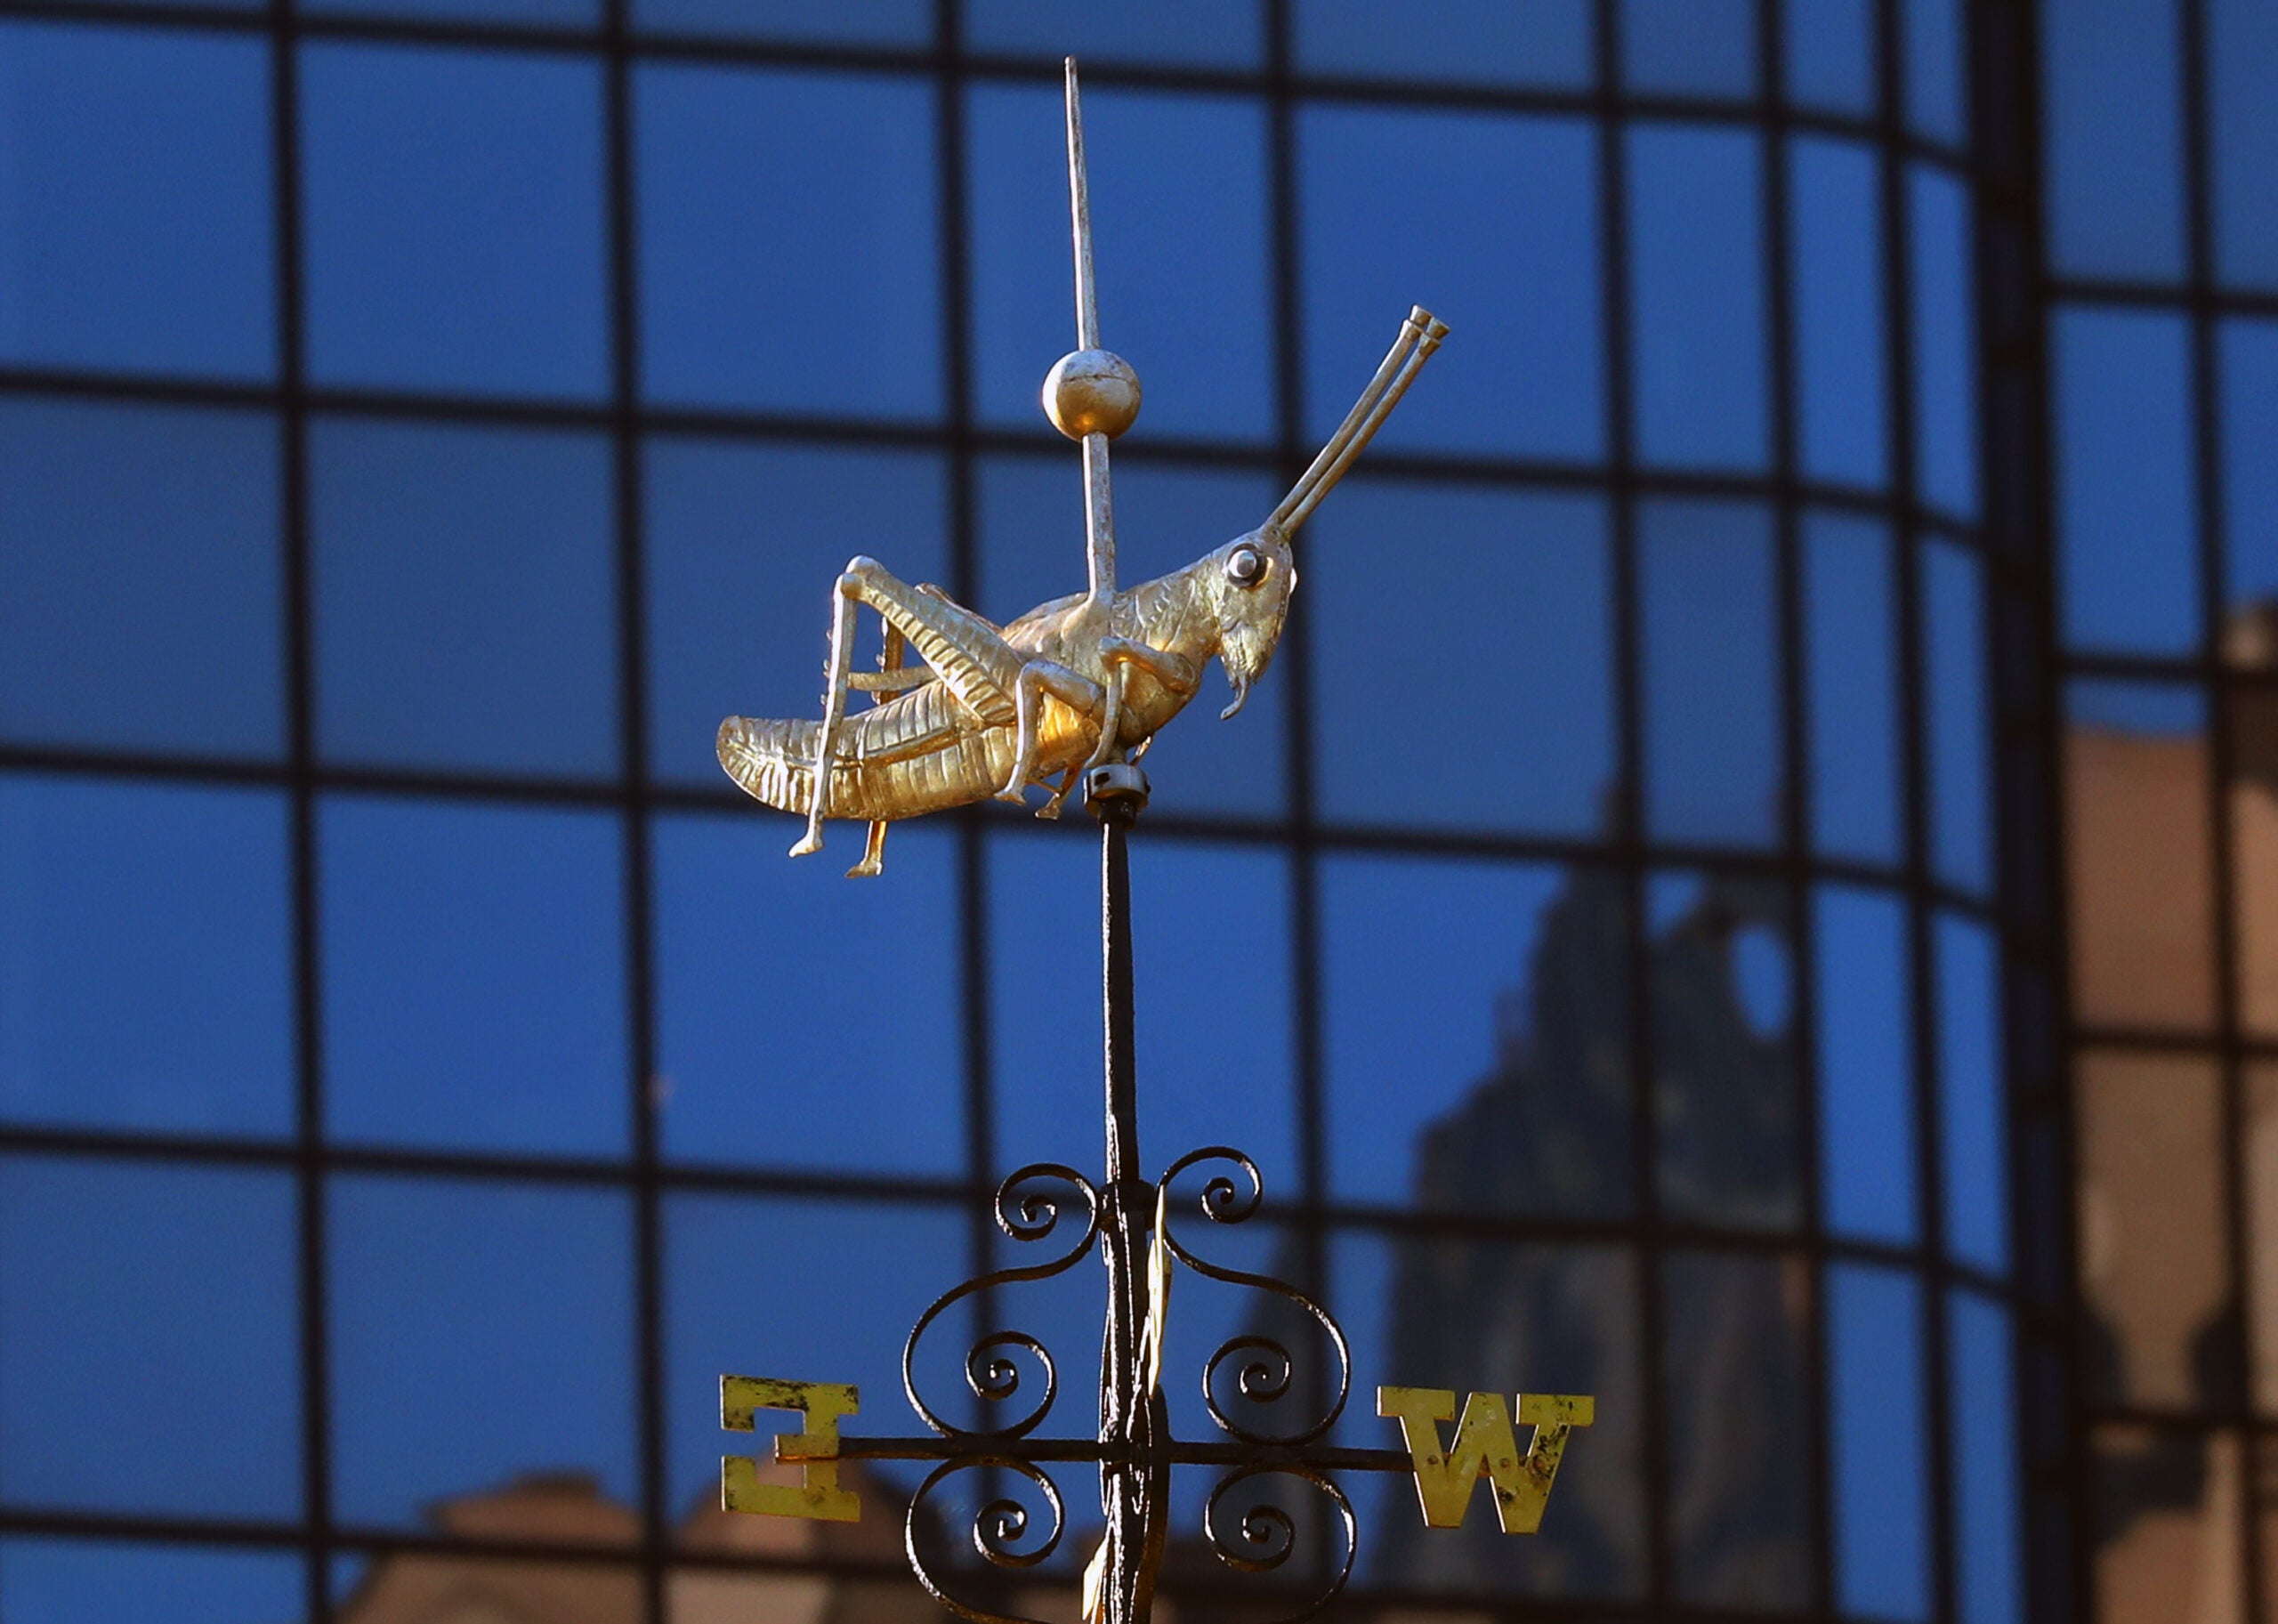 The gilded grasshopper atop Faneuil Hall in early morning sunlight.